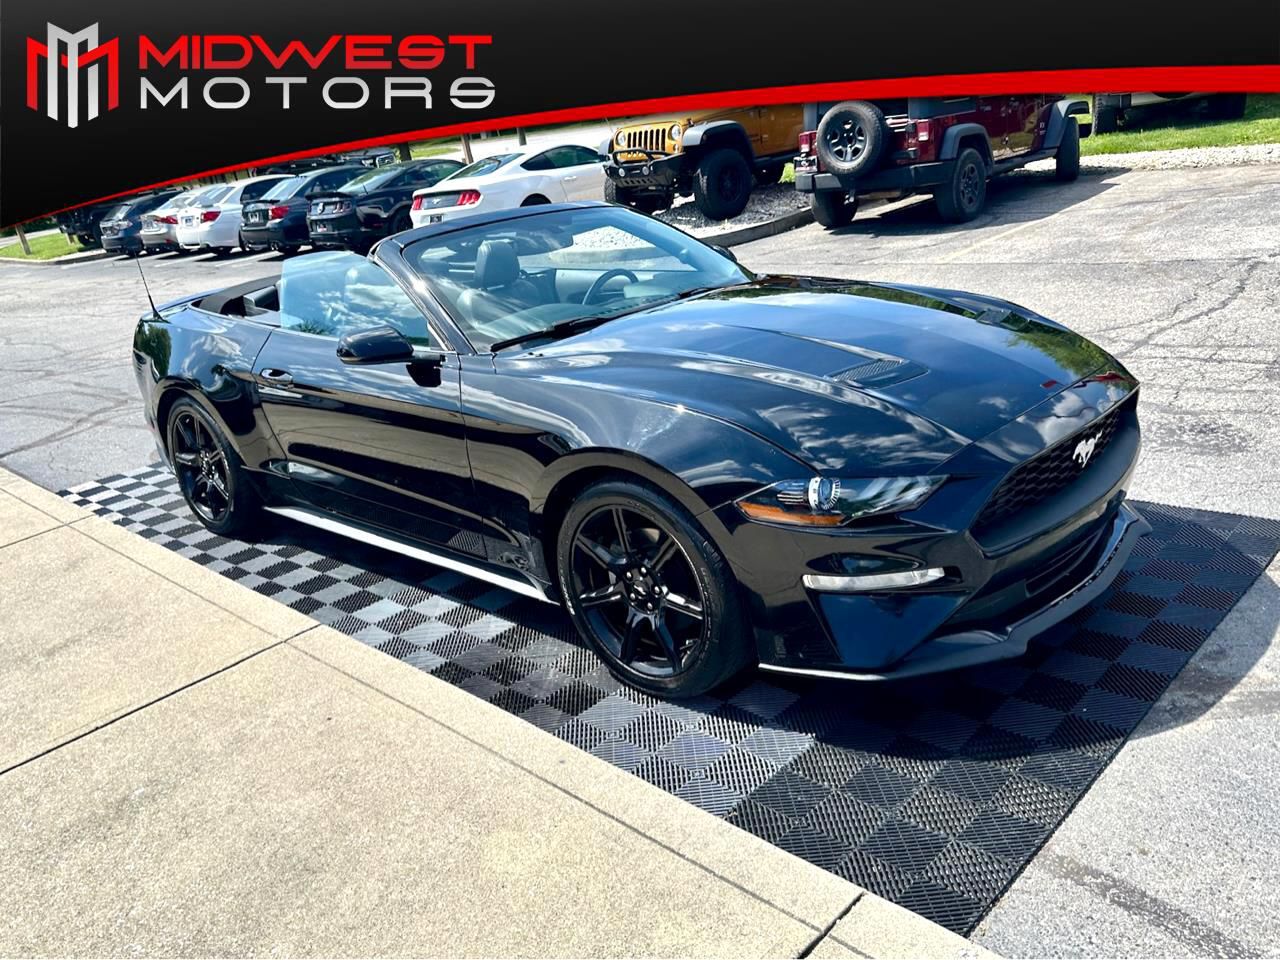 2018 Ford Mustang